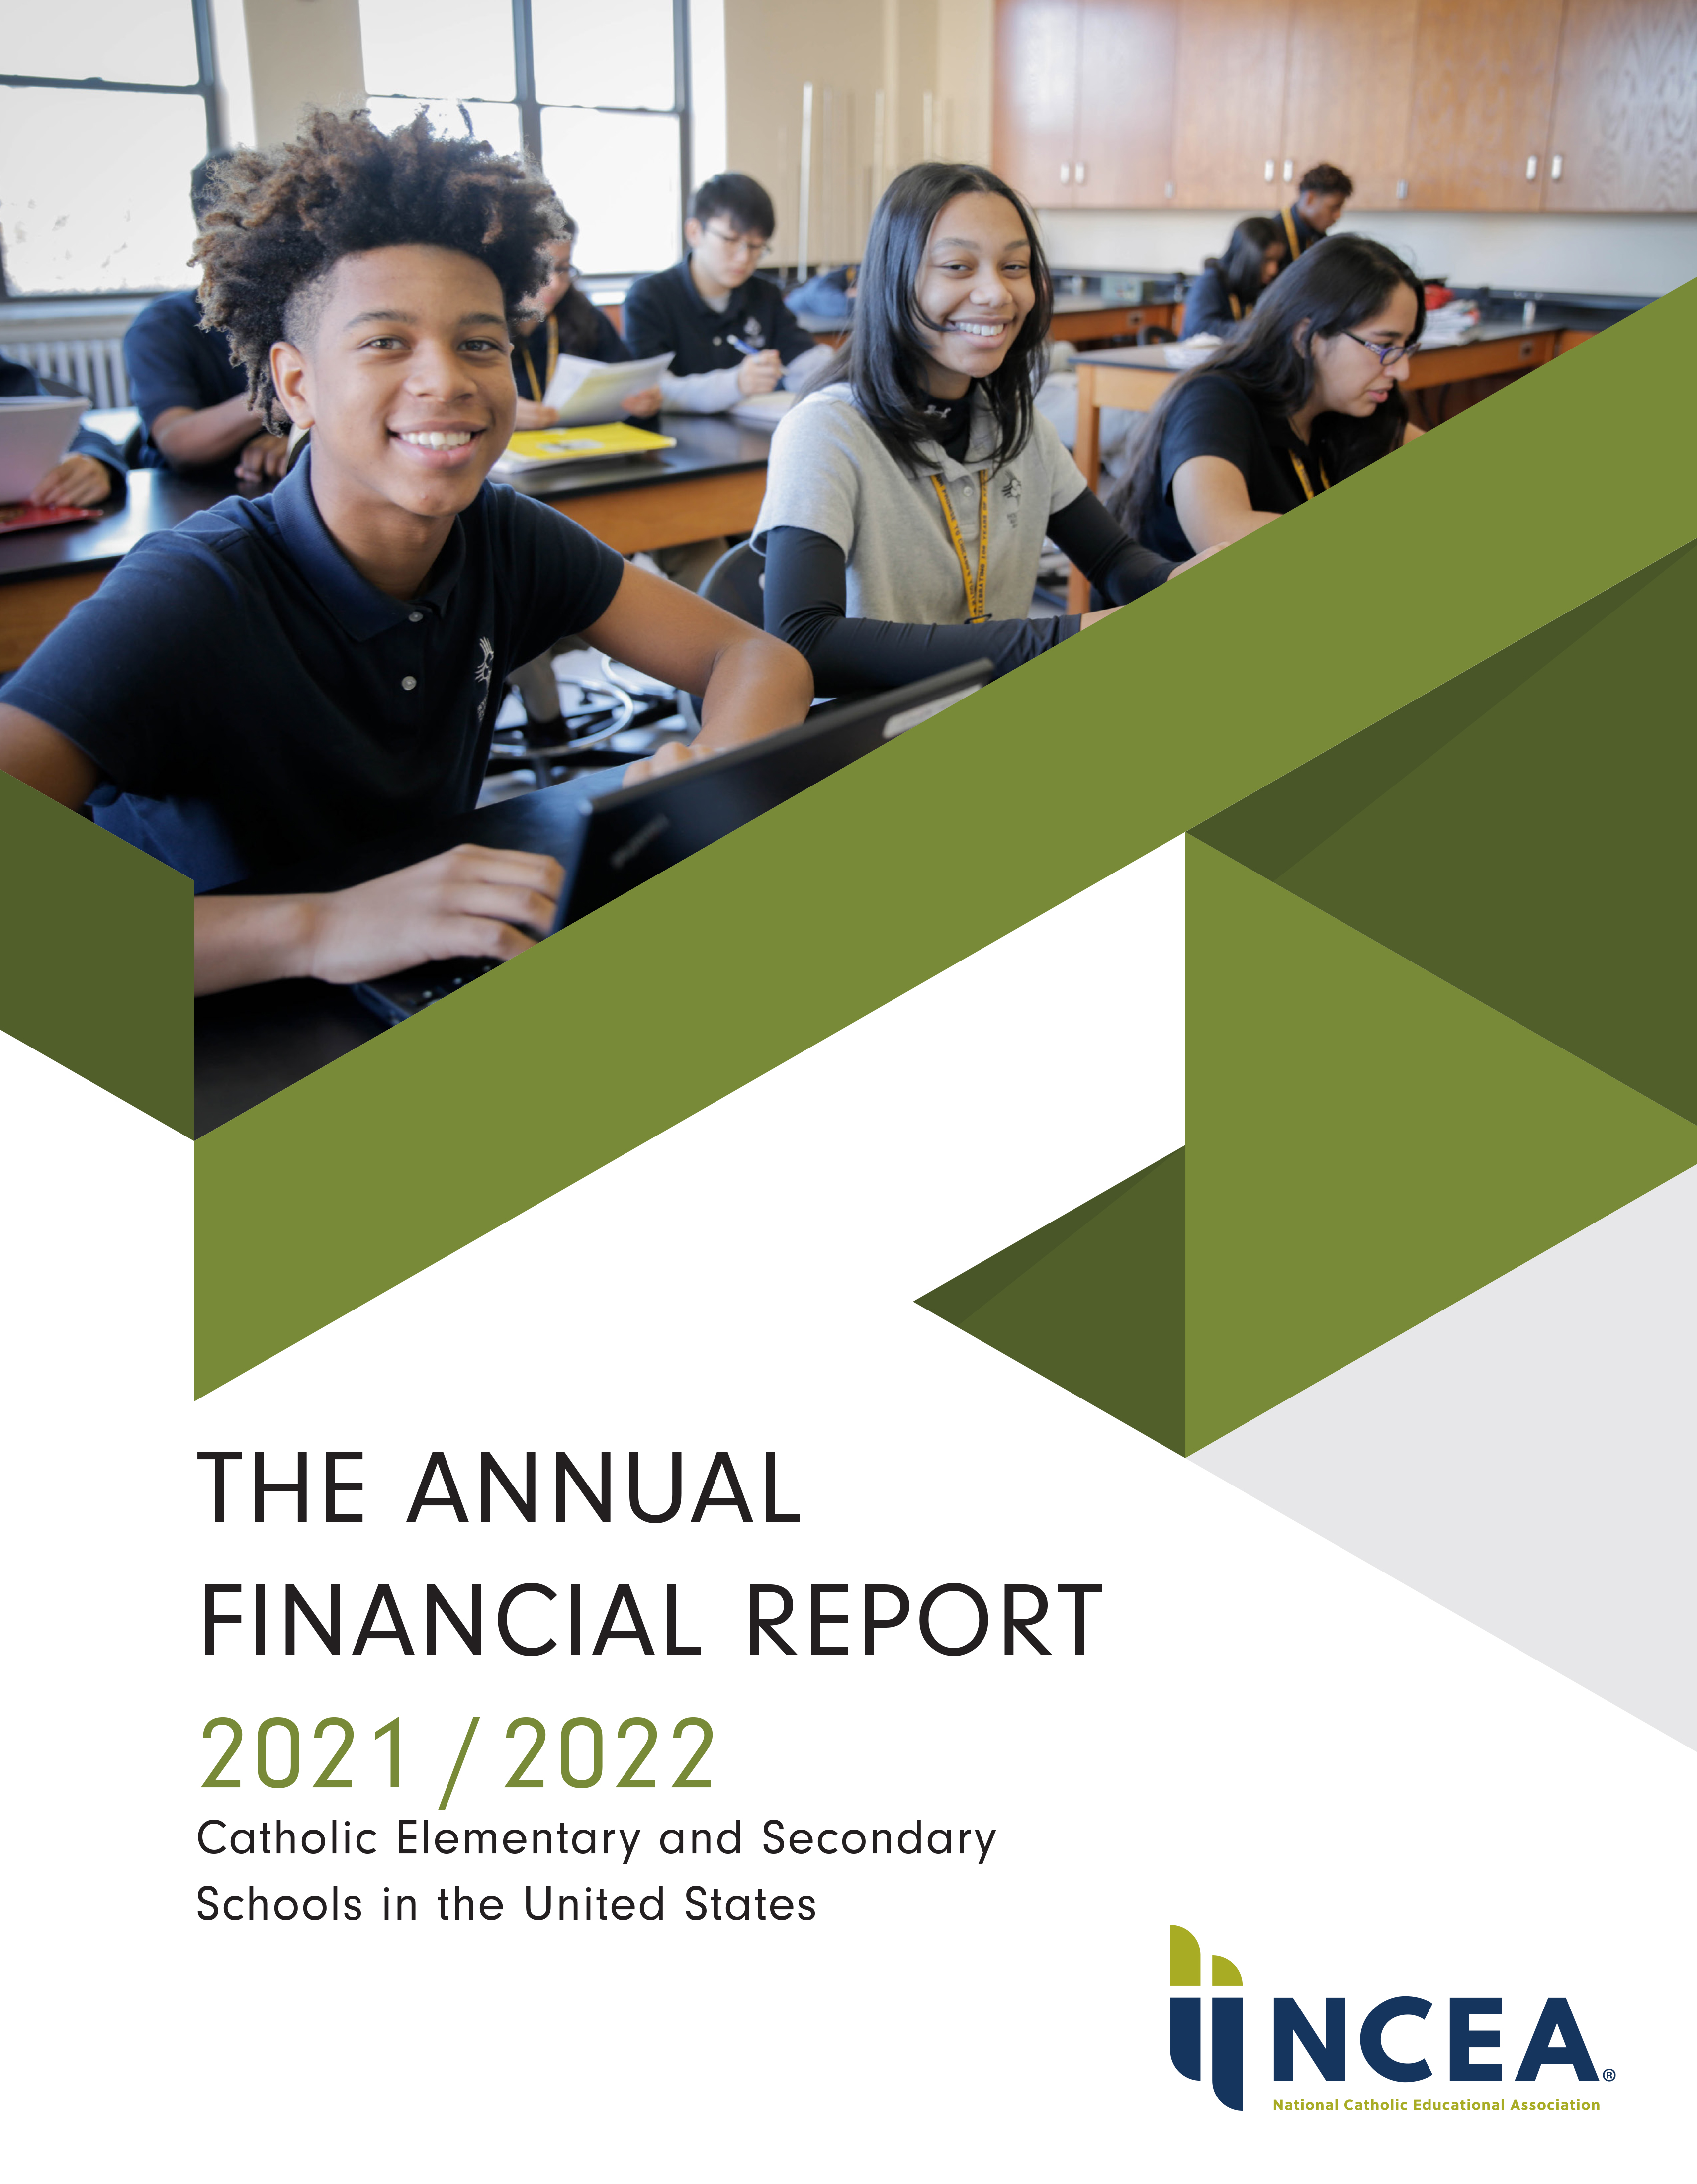 Downloadable PDF of The Annual Financial Report 2021-2022